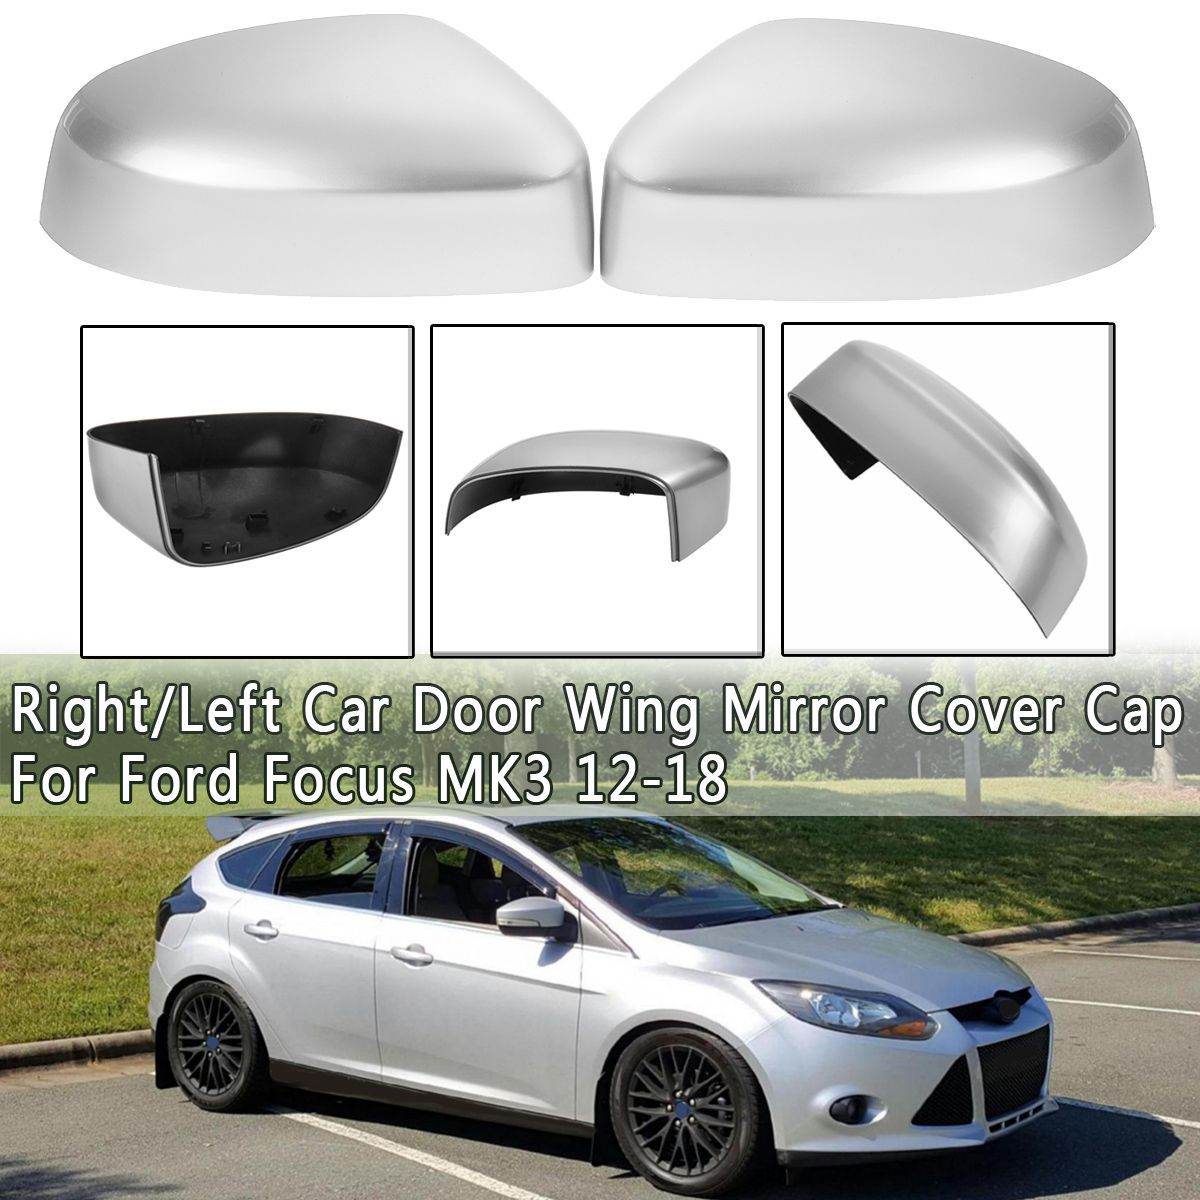 Car-RightLeft-Door-Wing-Mirror-Cover-Cap-Gloss-Silver-For-Ford-Focus-MK234-2008-2018-1658866